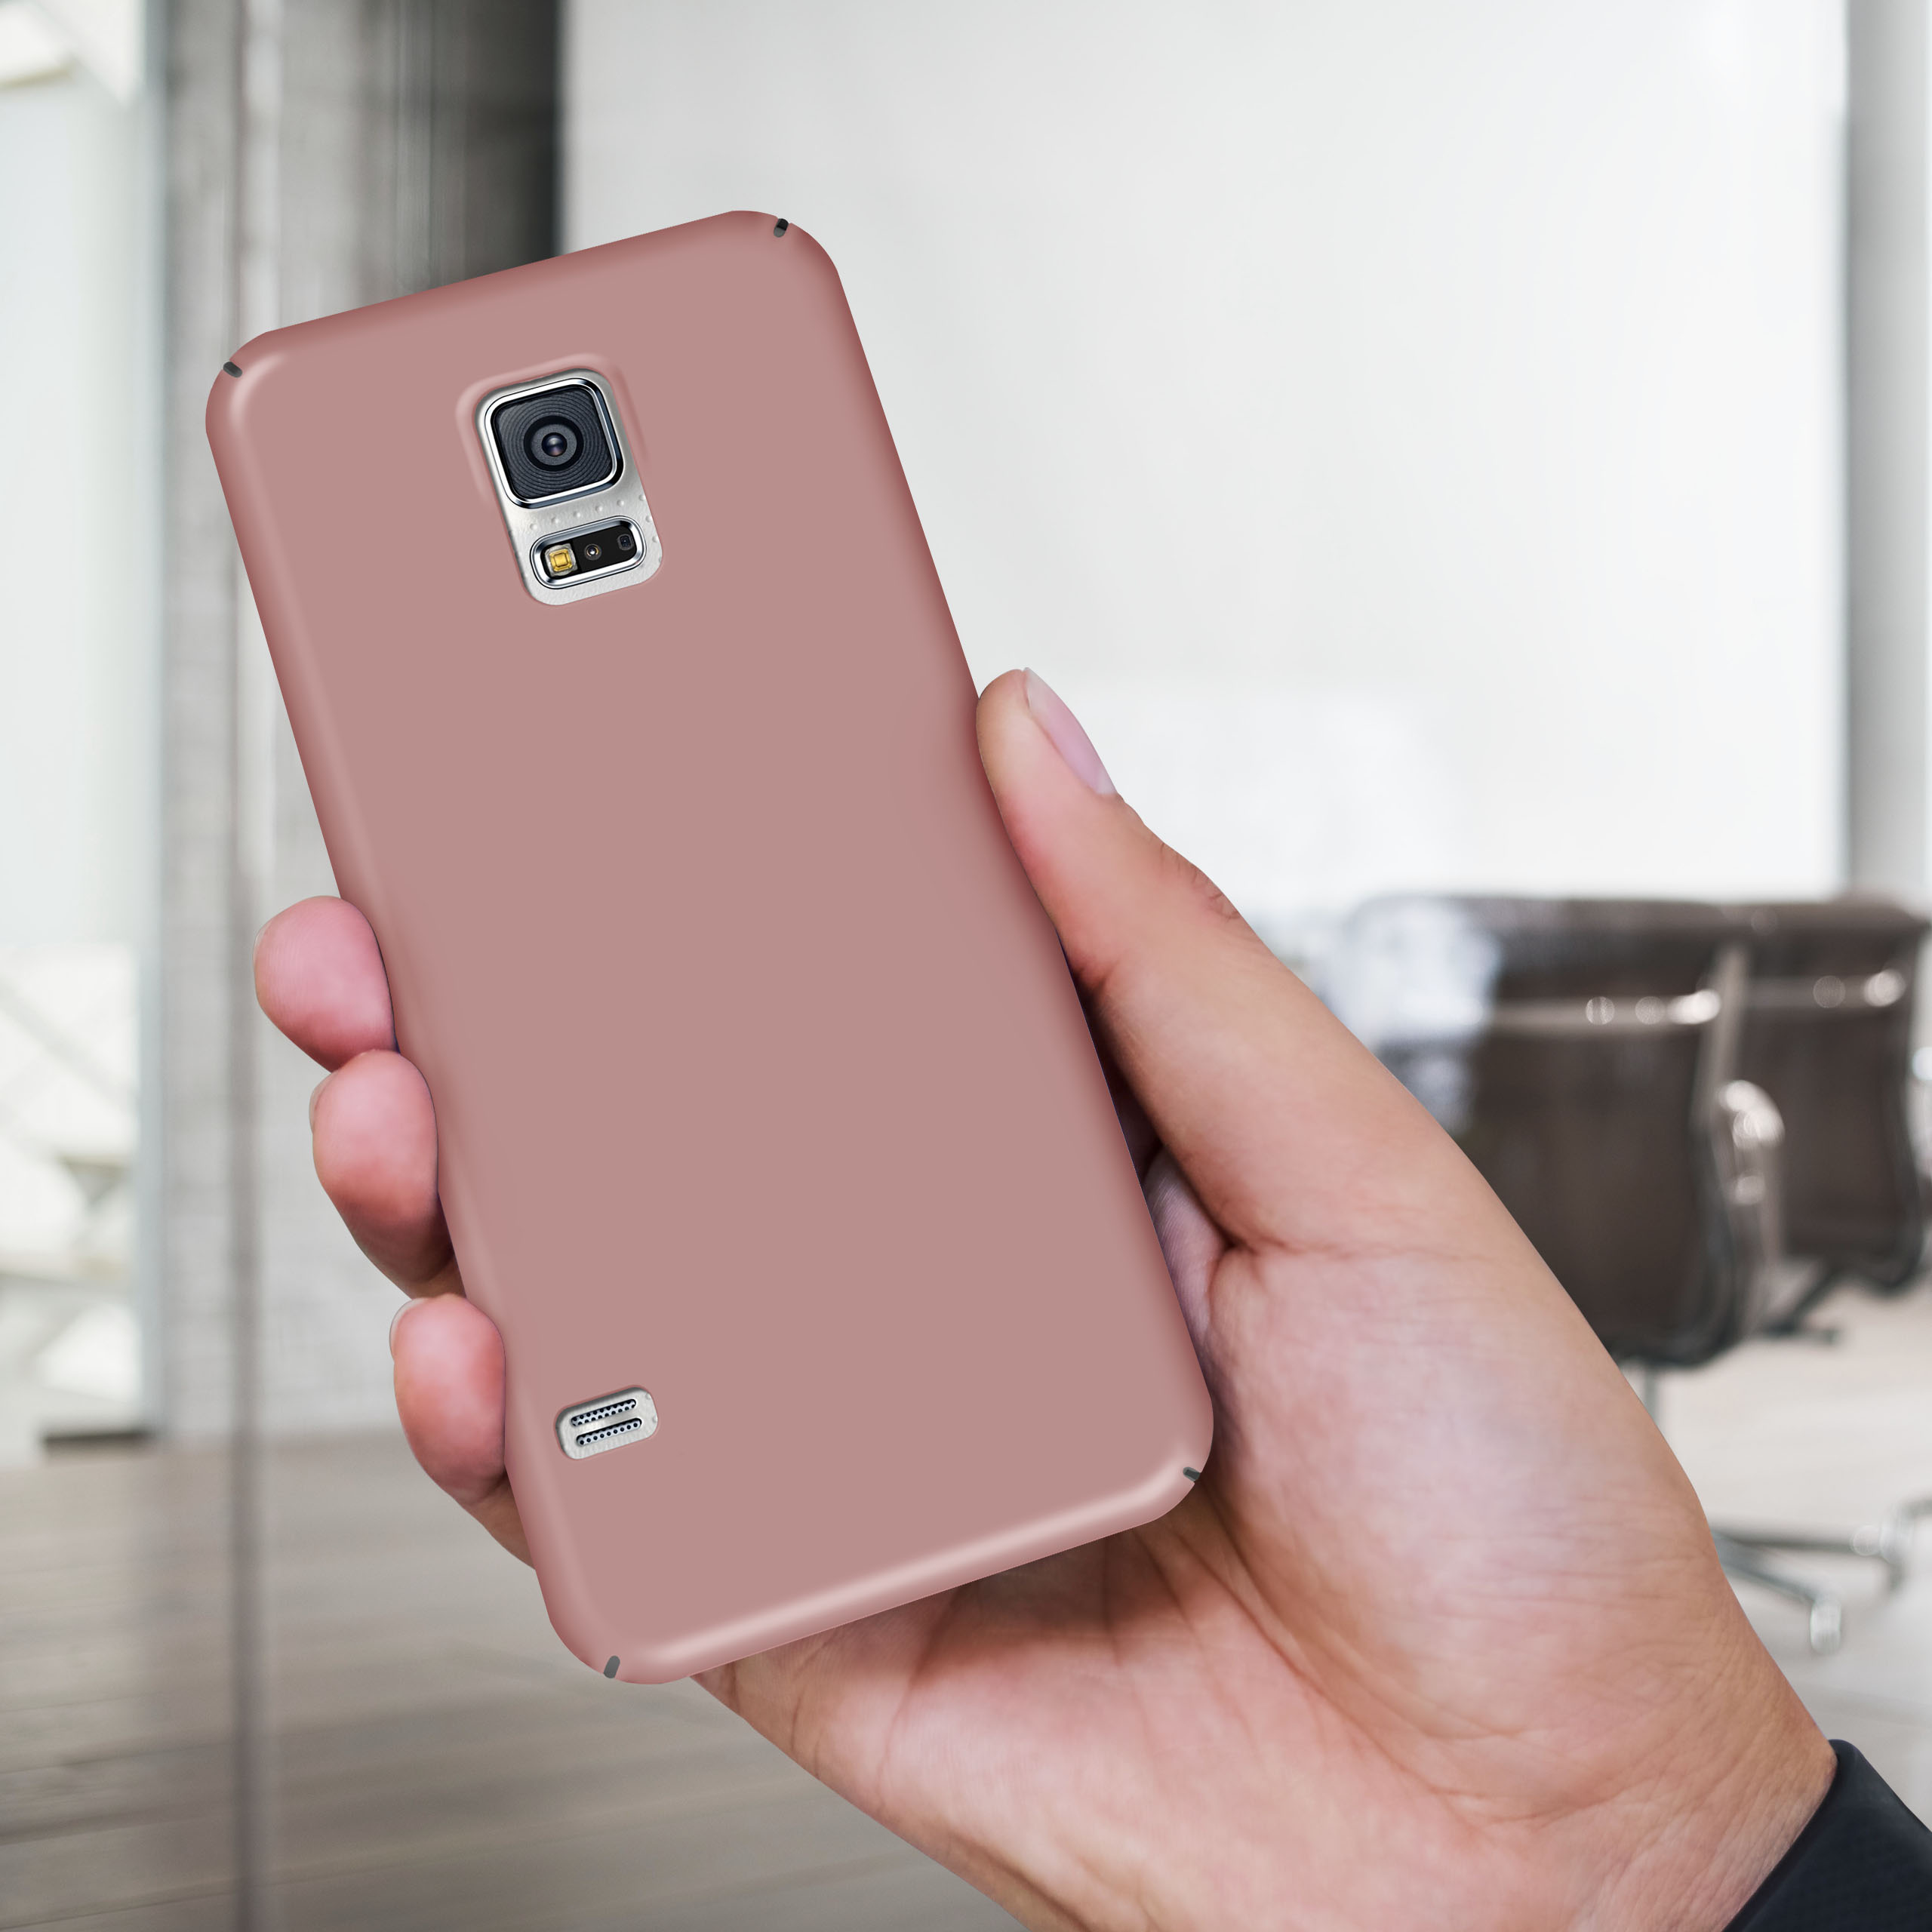 Case, S5 Neo, Galaxy / Backcover, Rose S5 MOEX Gold Alpha Samsung,